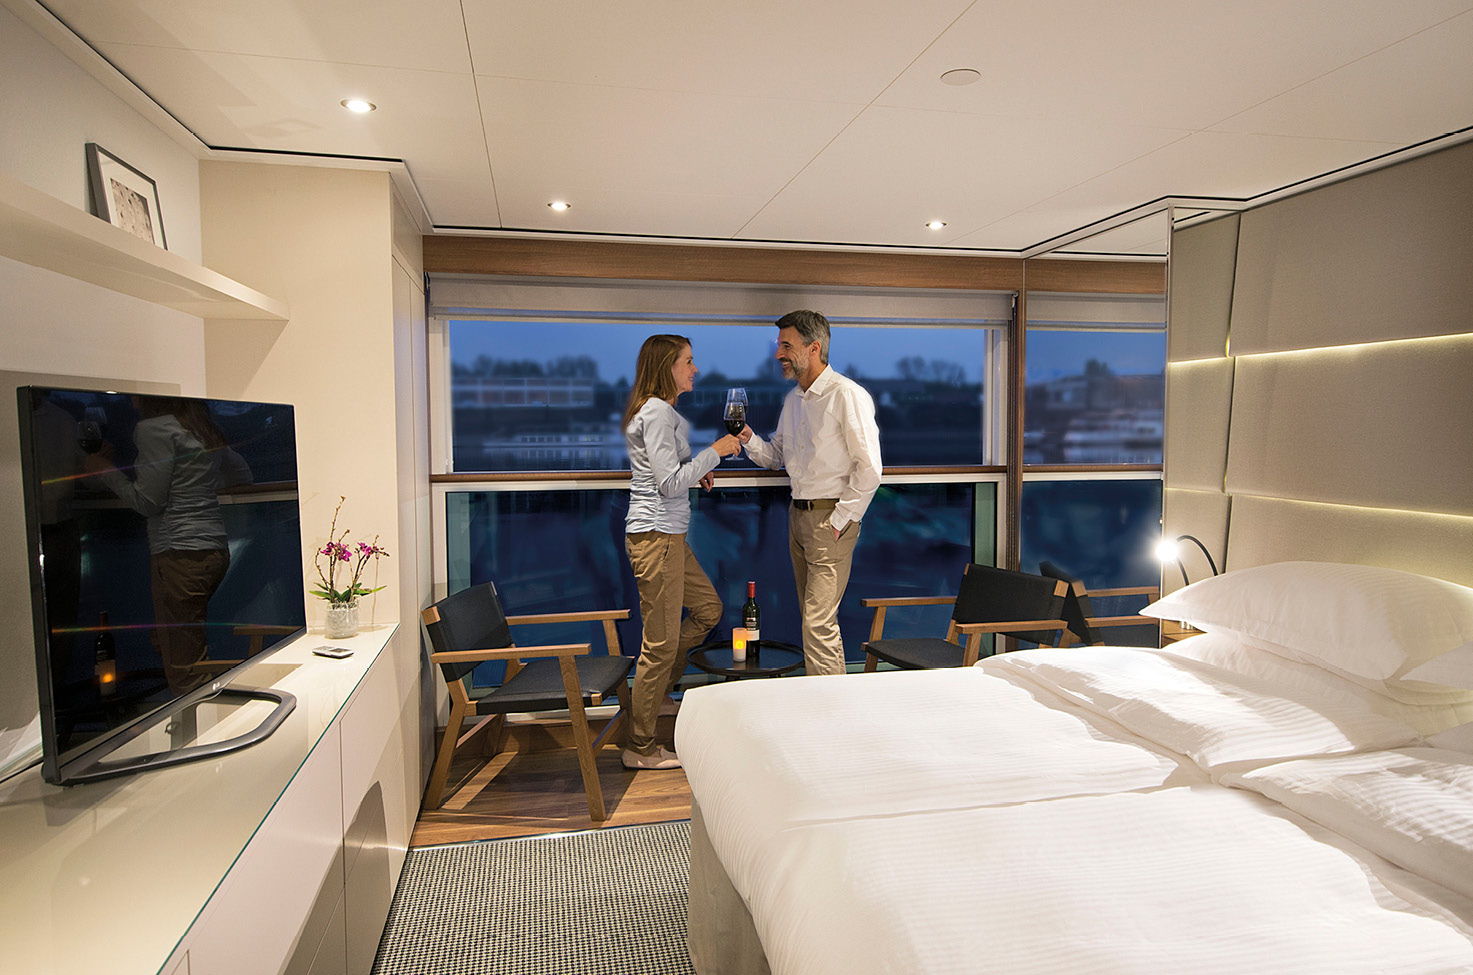 Guests enjoying a glass of wine at the balcony of their suite on board a luxury river cruise